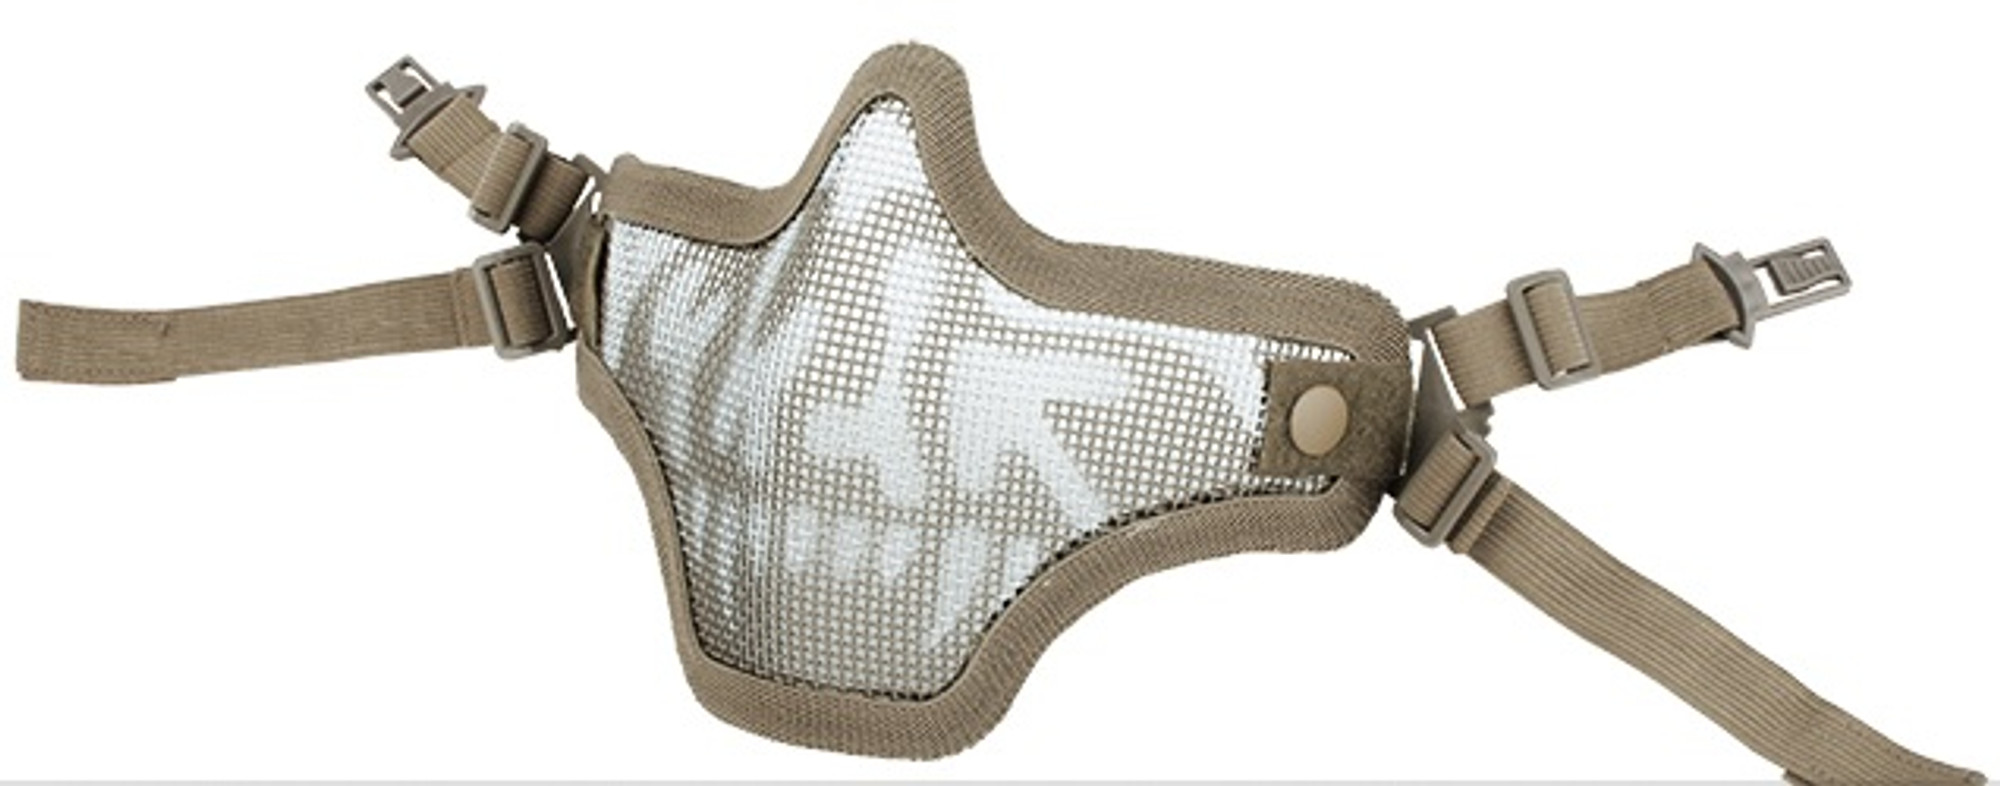 6mmProShop Iron Steel Mesh "Striker V1" Lower Half Mask for Use with Bump Helmets -  Tan with Skull